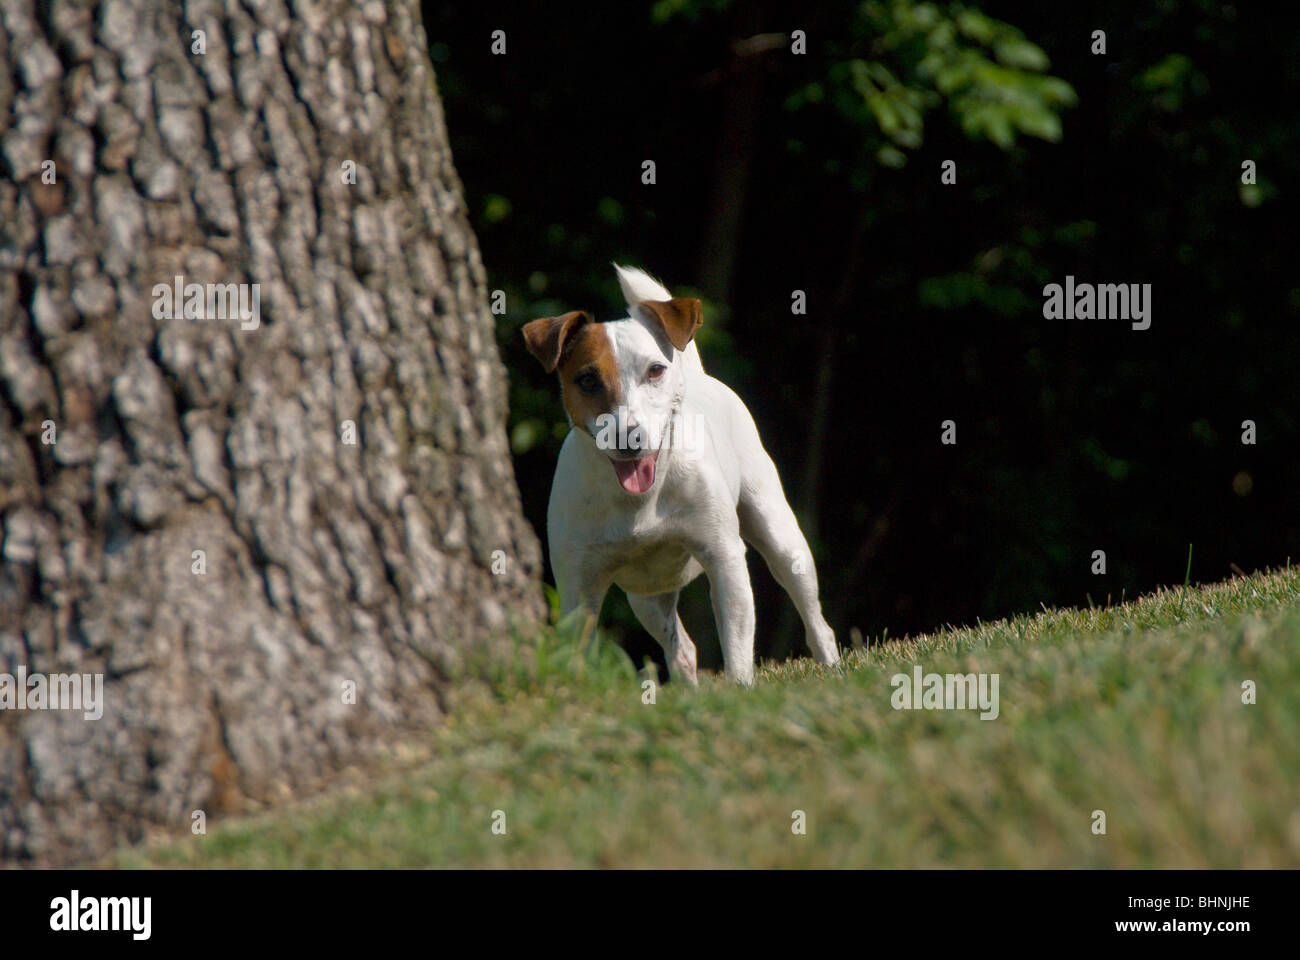 Jack Russel Terrier running, playing and looking from around a tree. Stock Photo